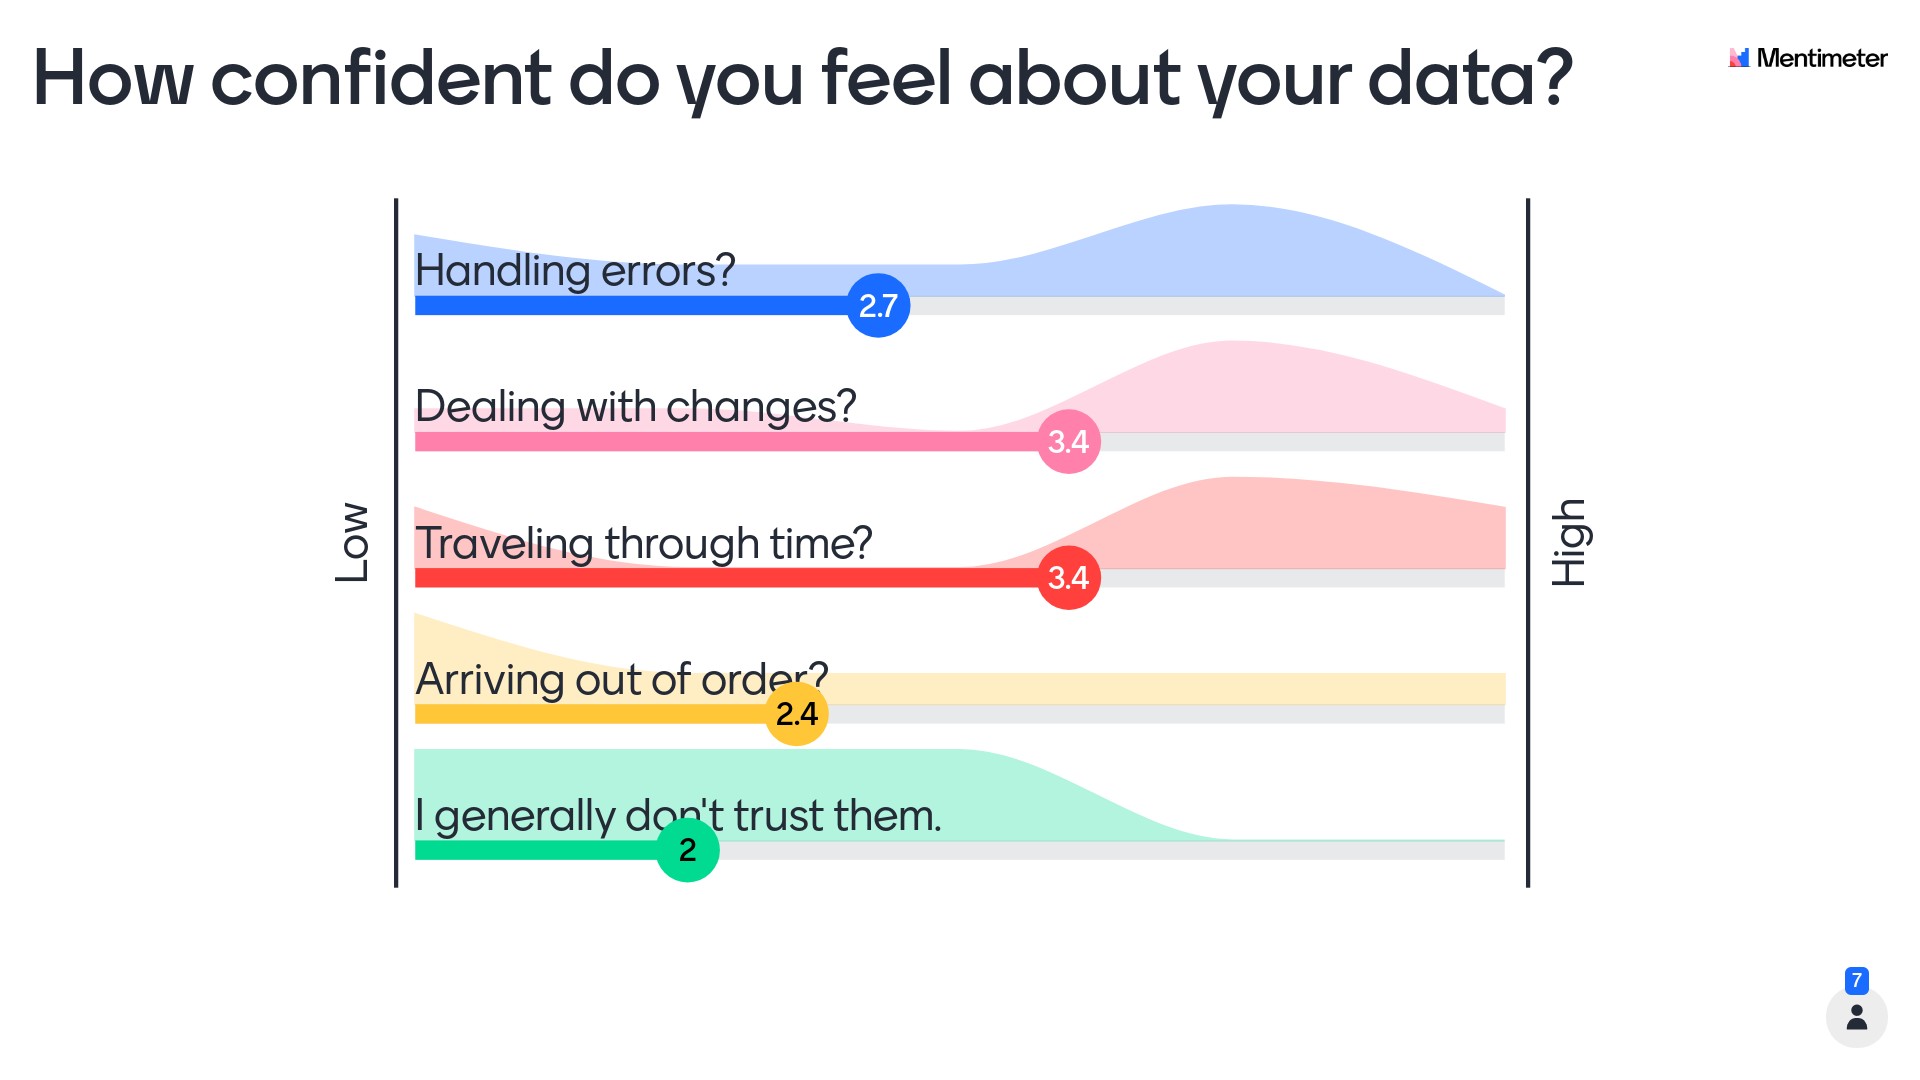 How confident do you feel about your data?